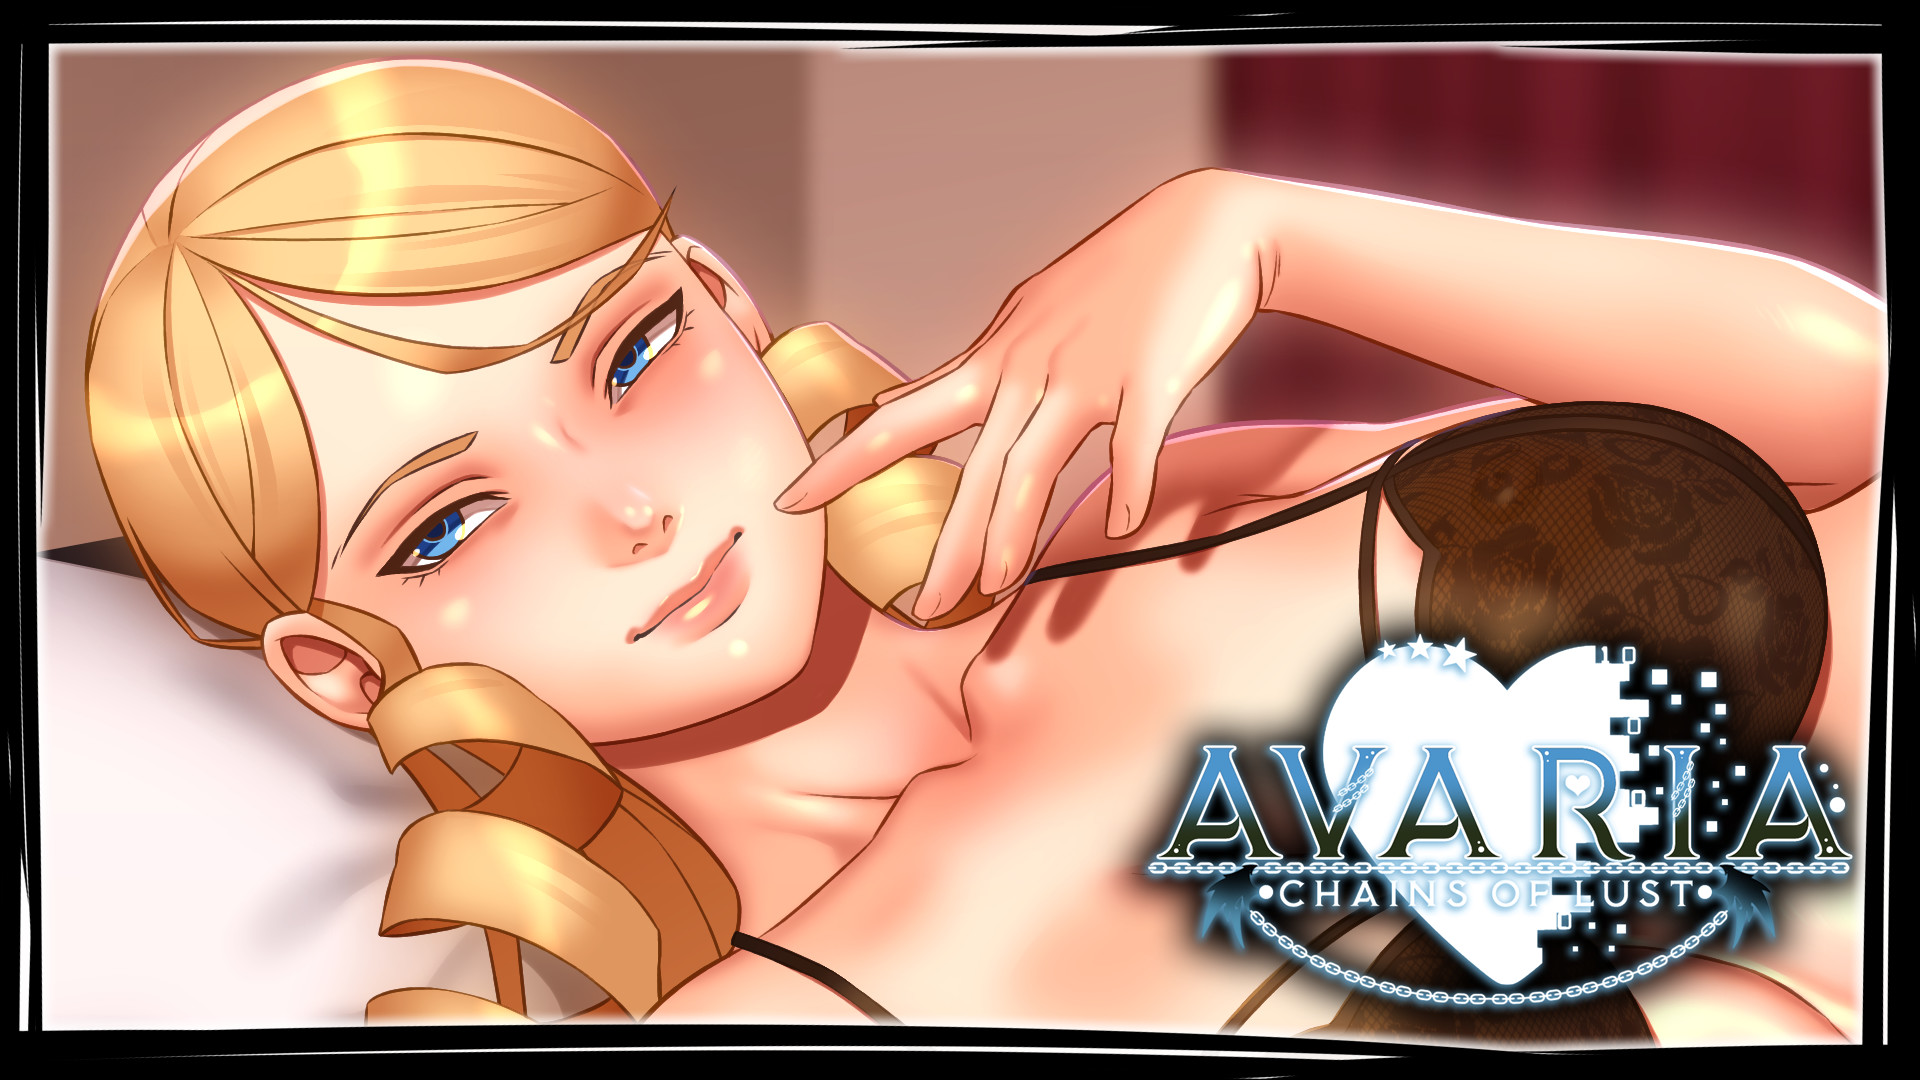 Avaria: Chains of Lust Day 1